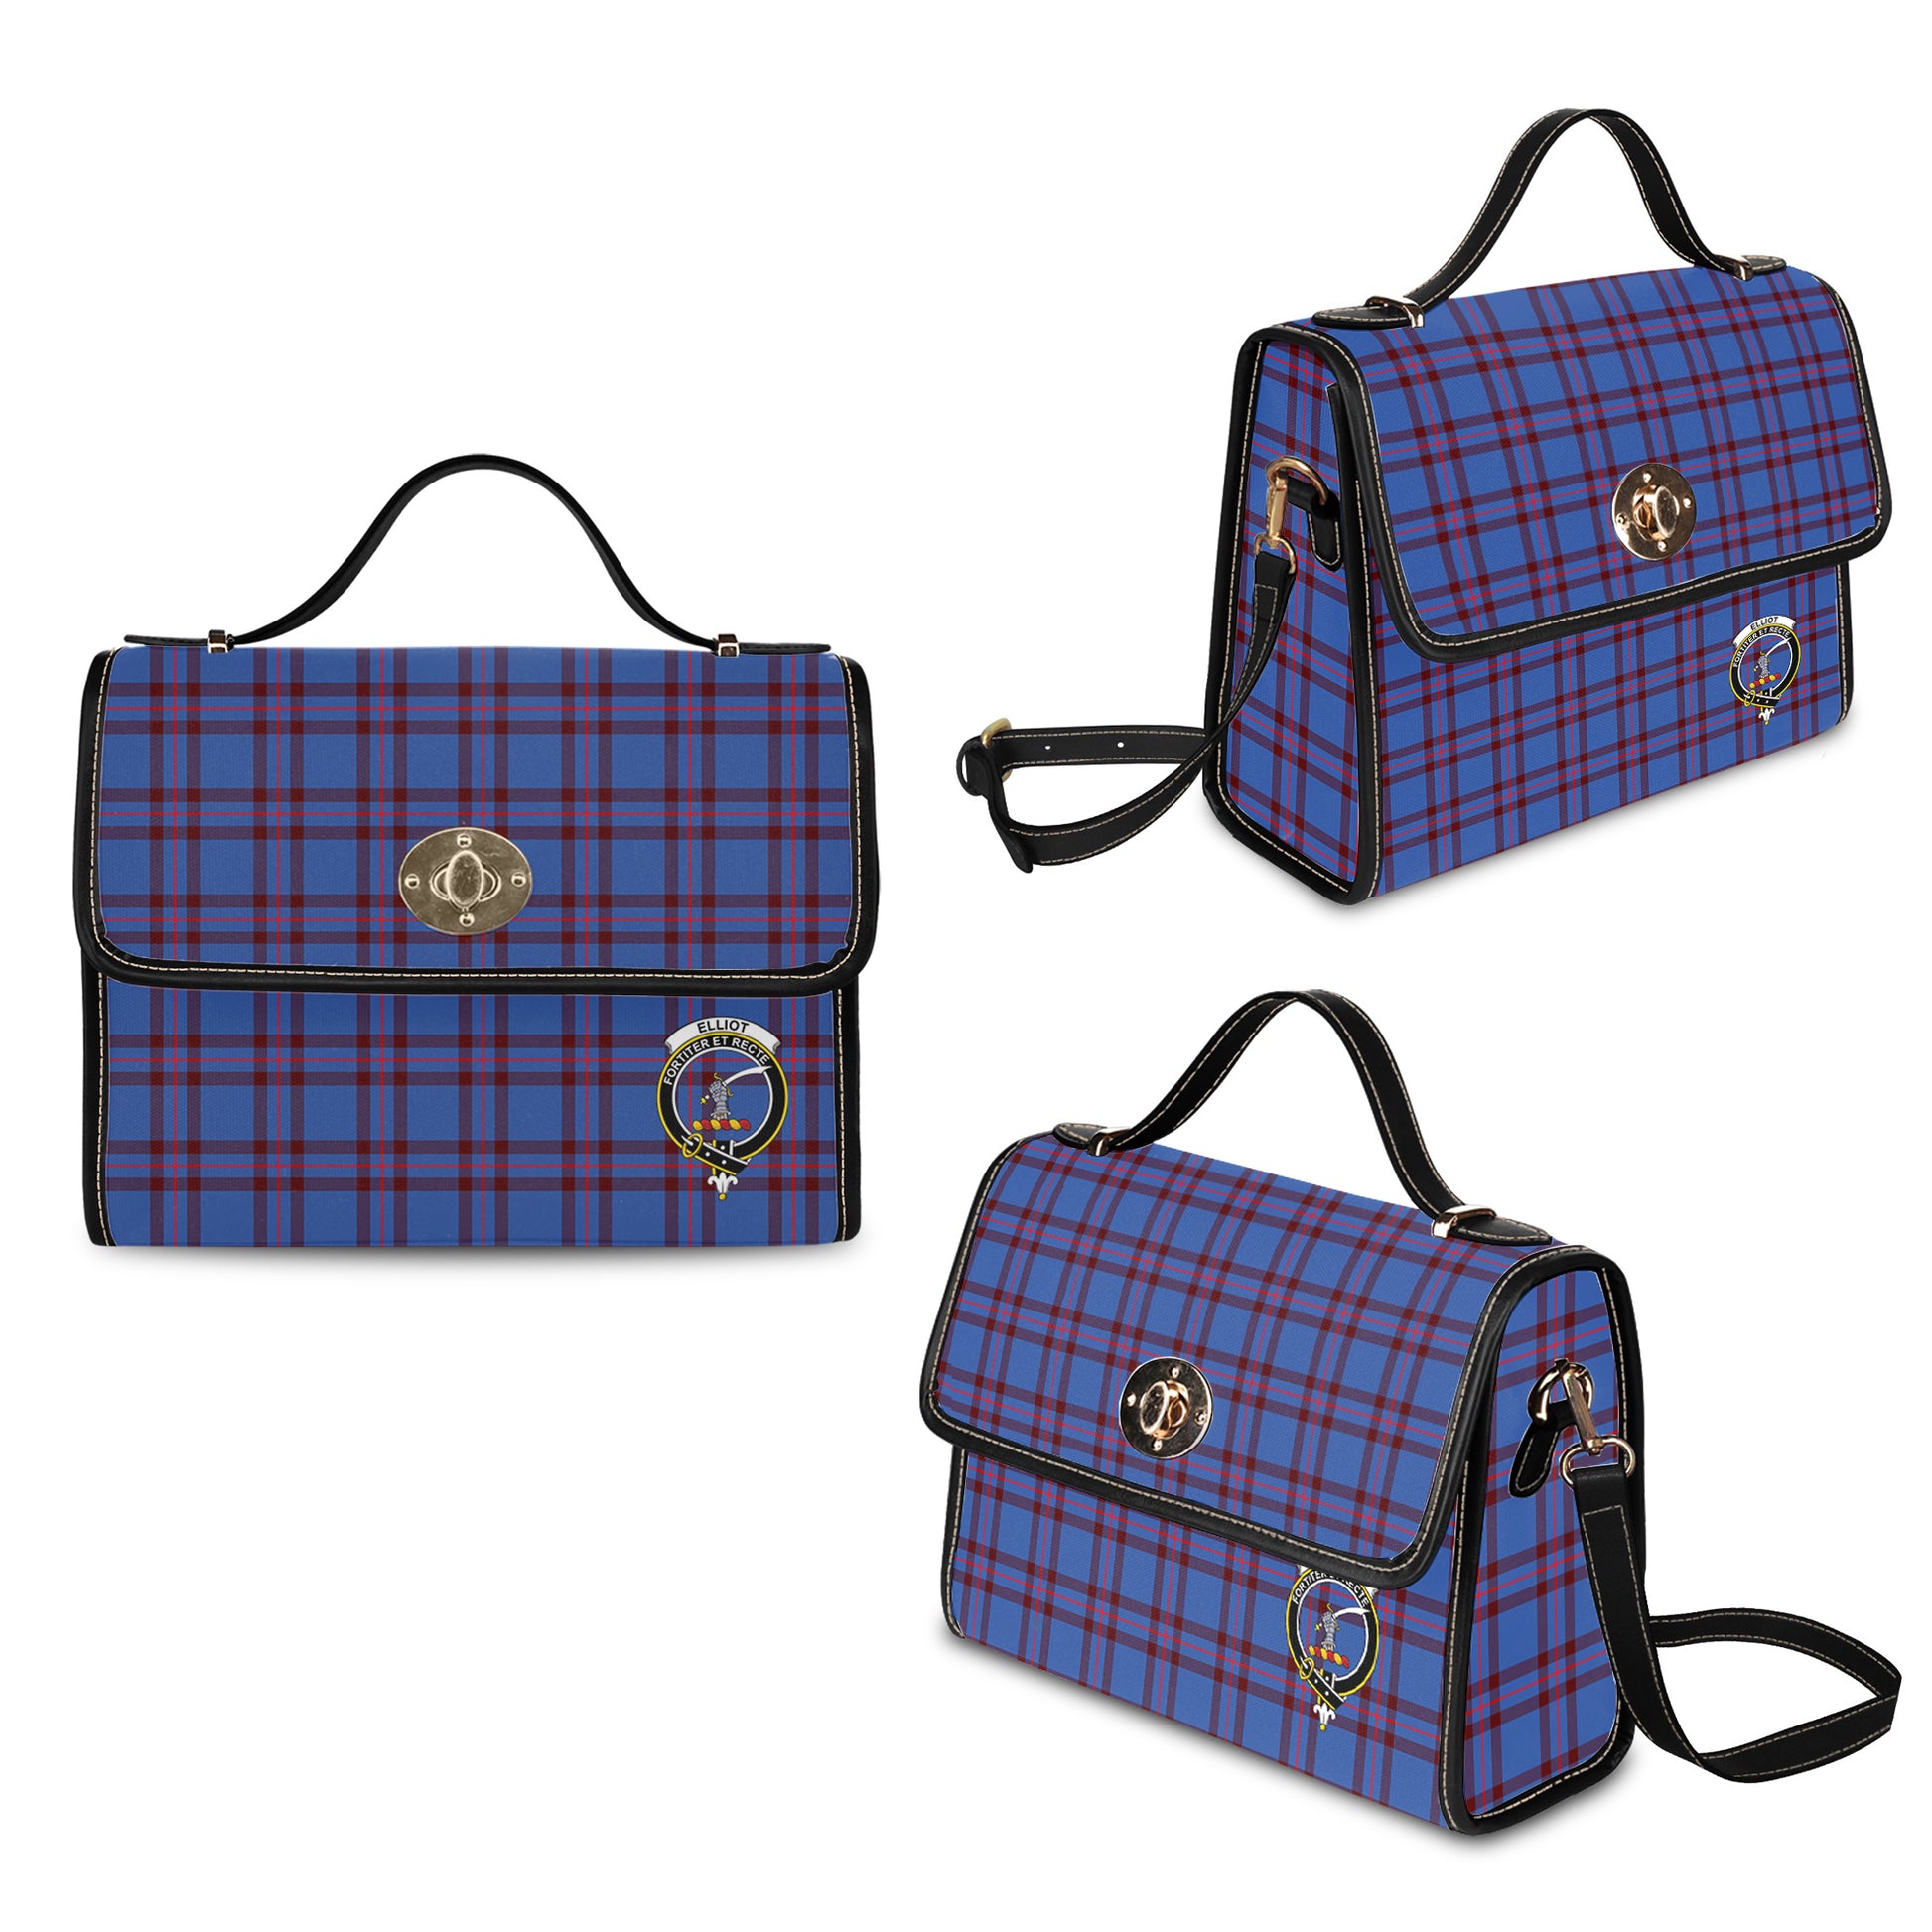 elliot-modern-tartan-leather-strap-waterproof-canvas-bag-with-family-crest